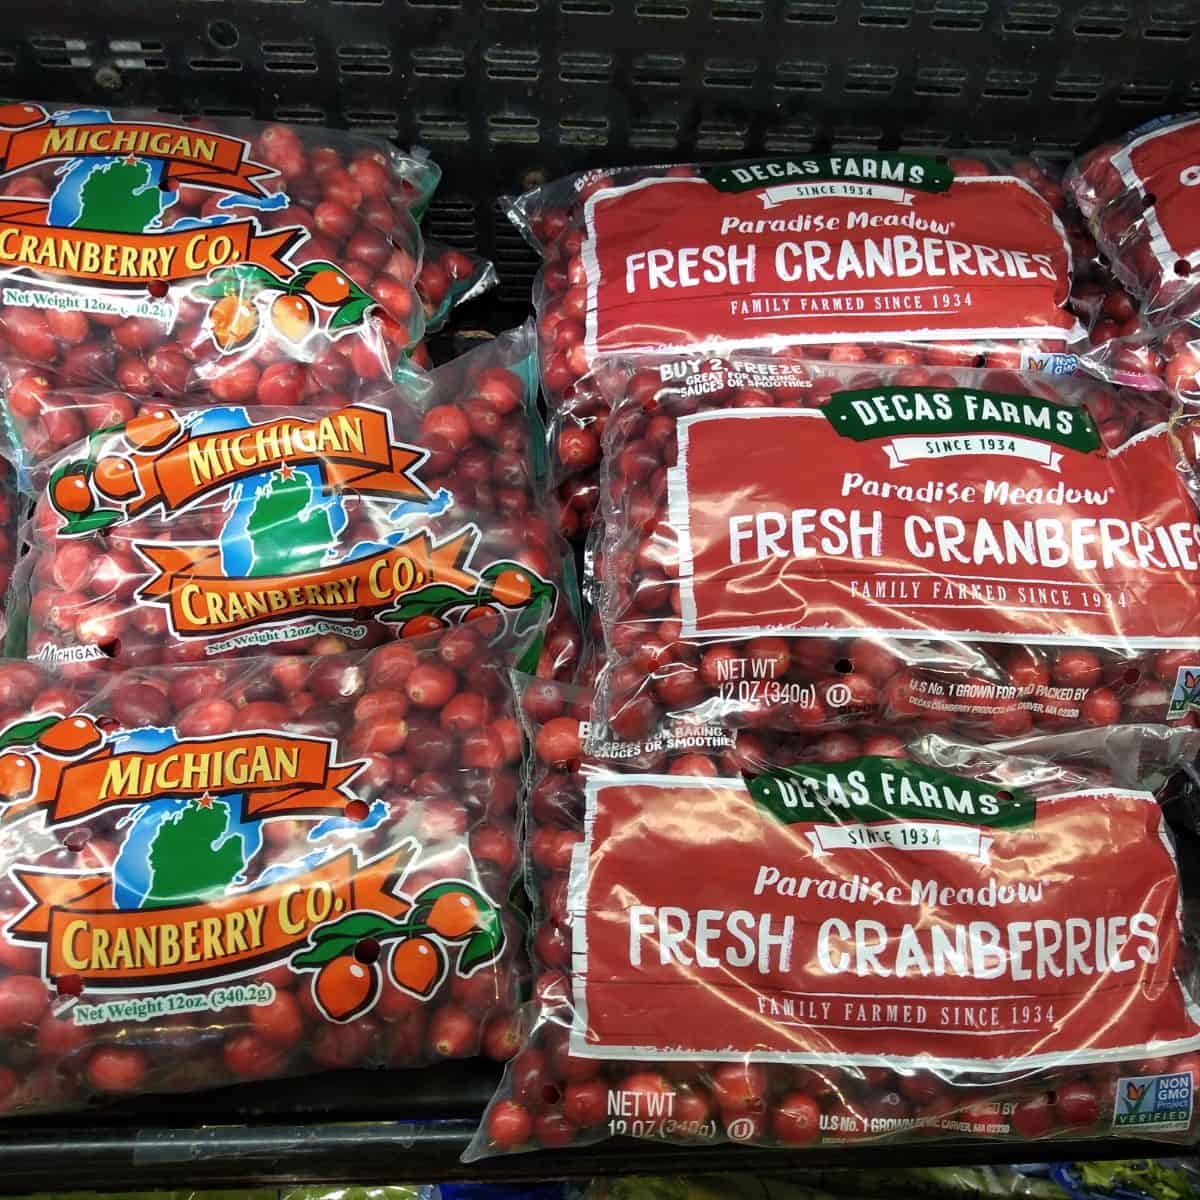 Bags of fresh cranberries at the grocery store.